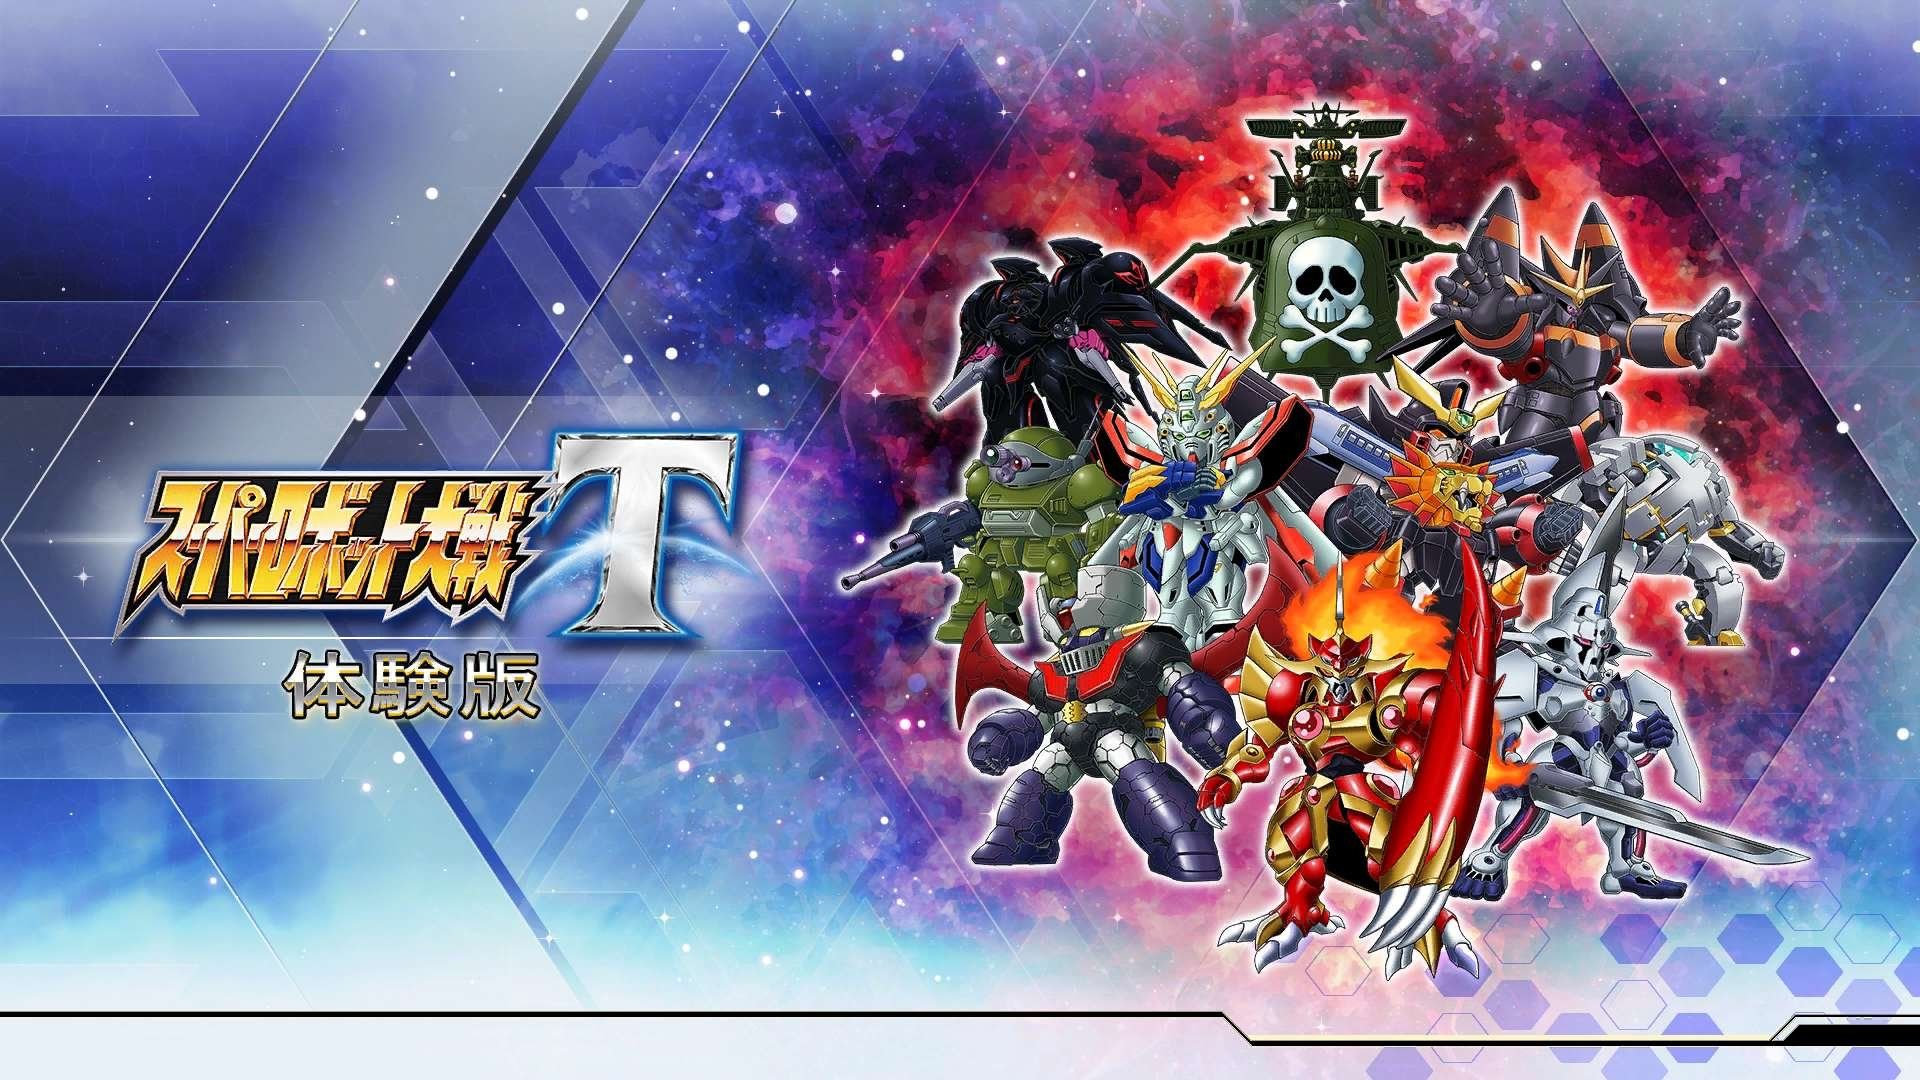 Super Robot Wars T Adds Super Expert Difficulty, New Game Systems